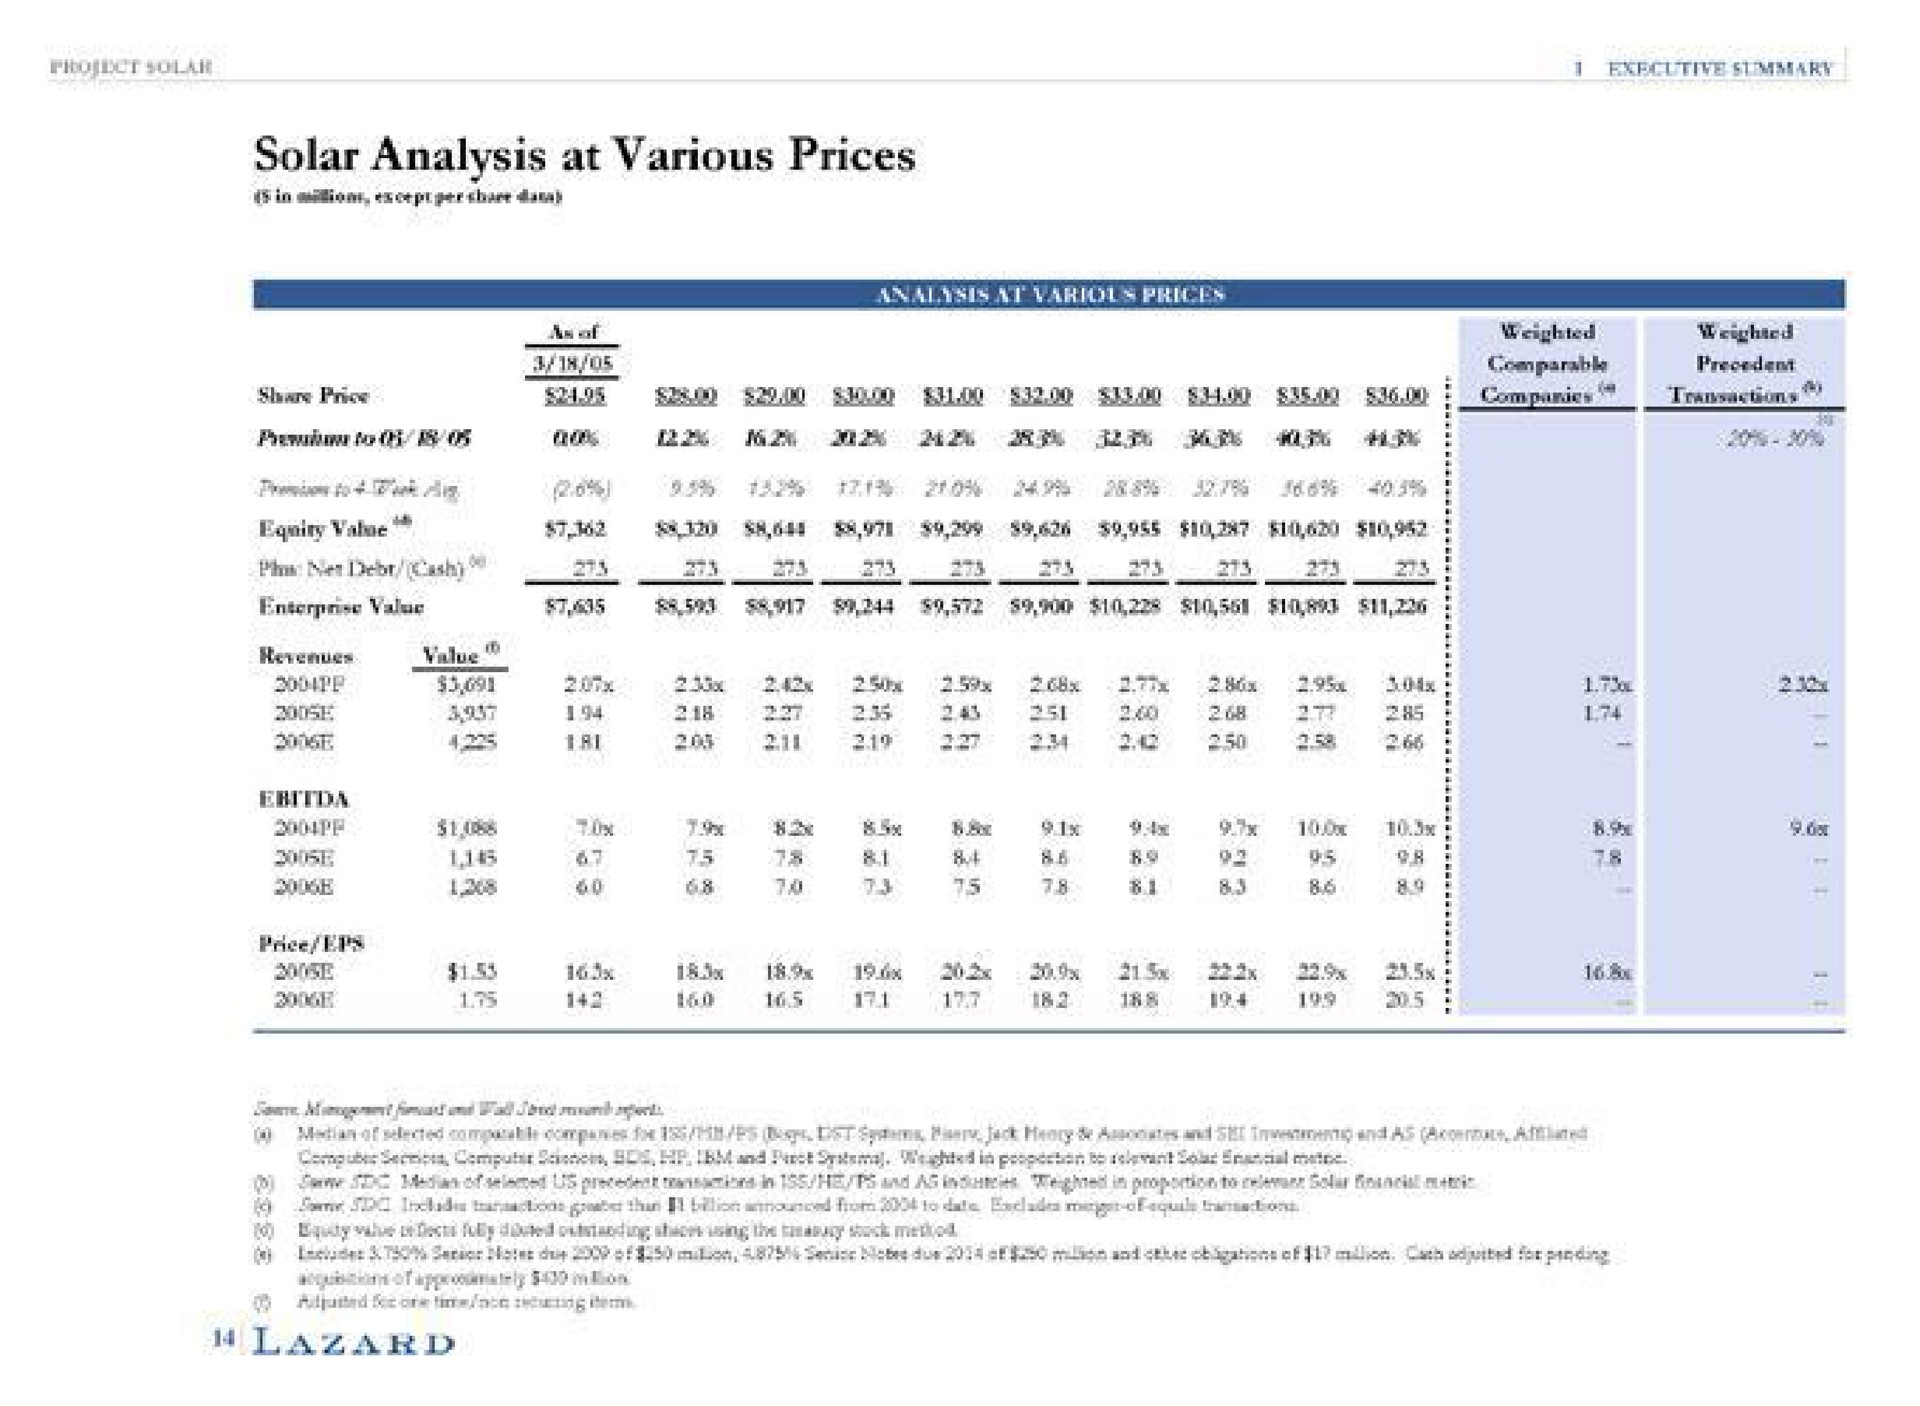 solar analysis at various prices weighted an of weighted analysis at various prices | Lazard